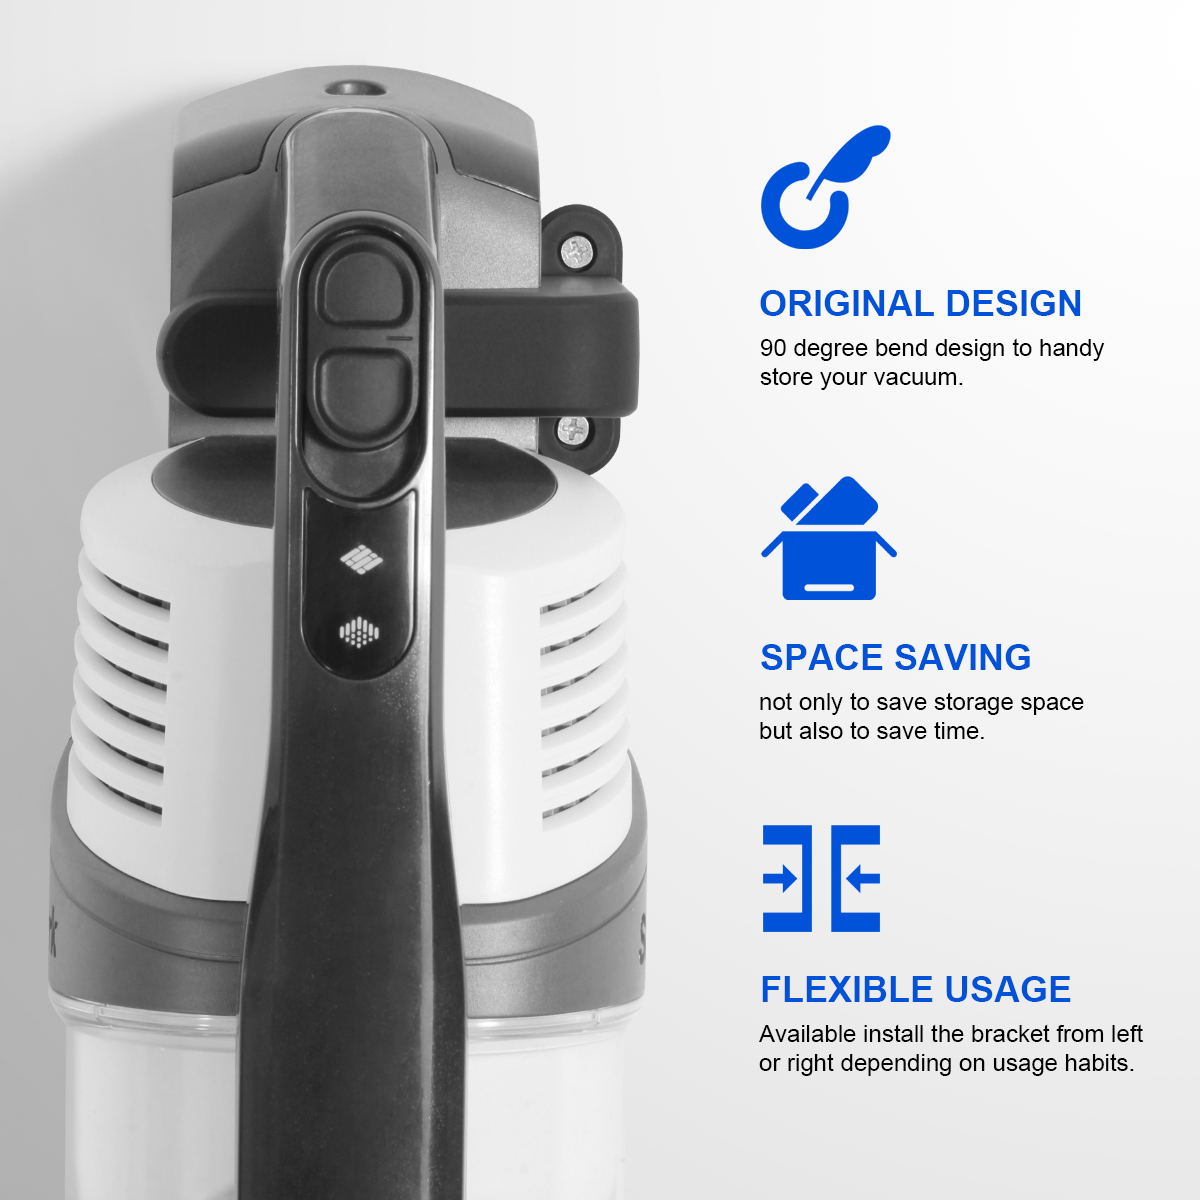 designed with a 90-degree angle and features a groove to securely hold the vacuum in place